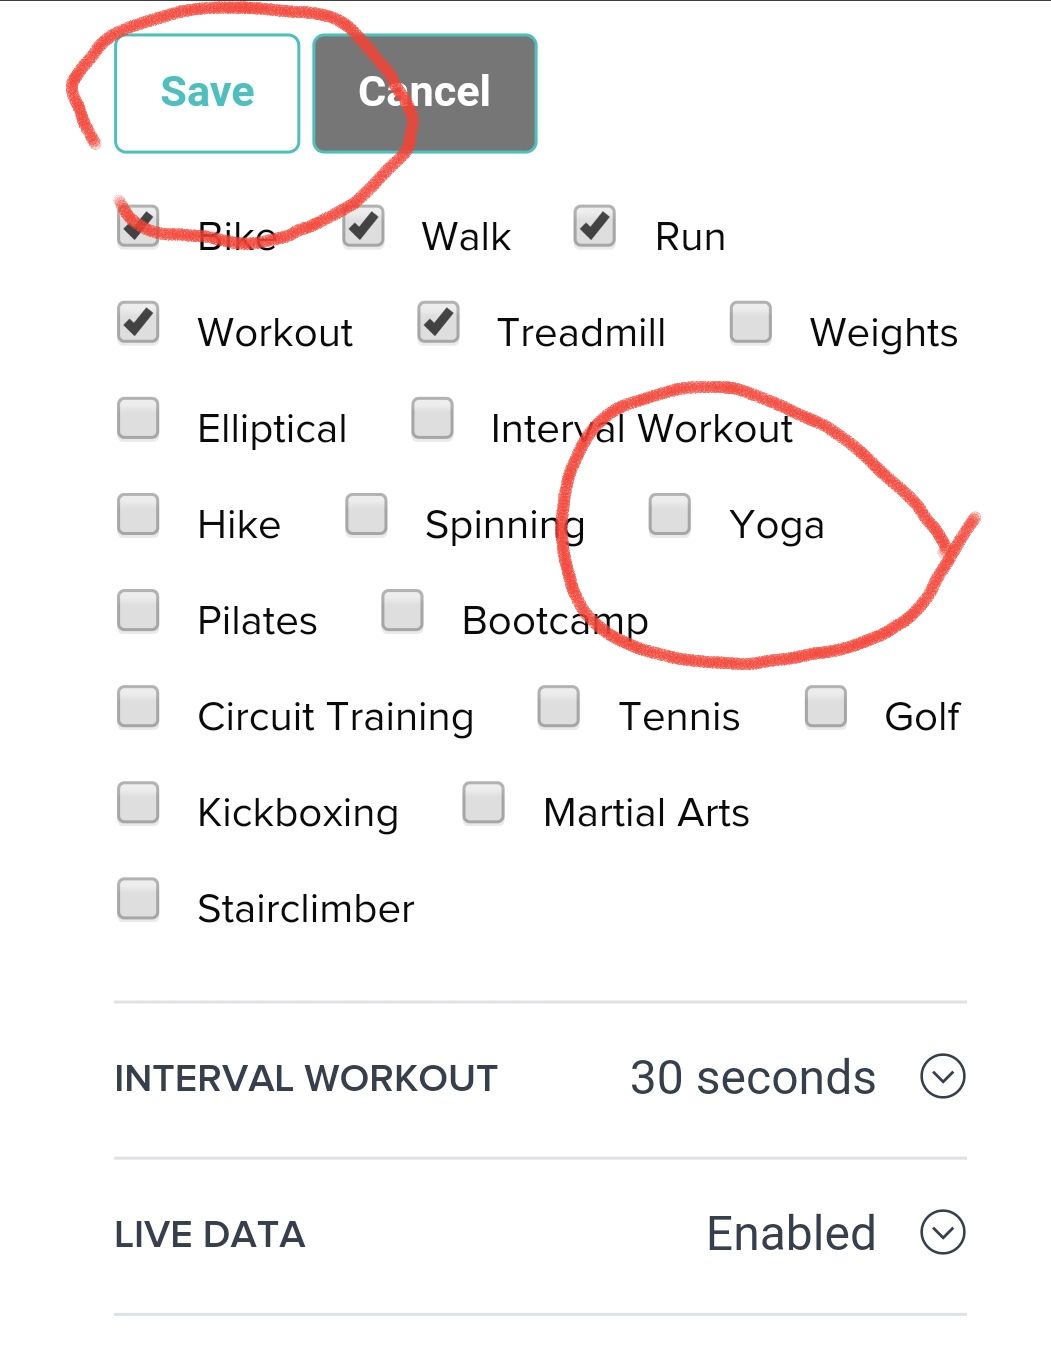 Solved: Track Yoga classes - Fitbit 